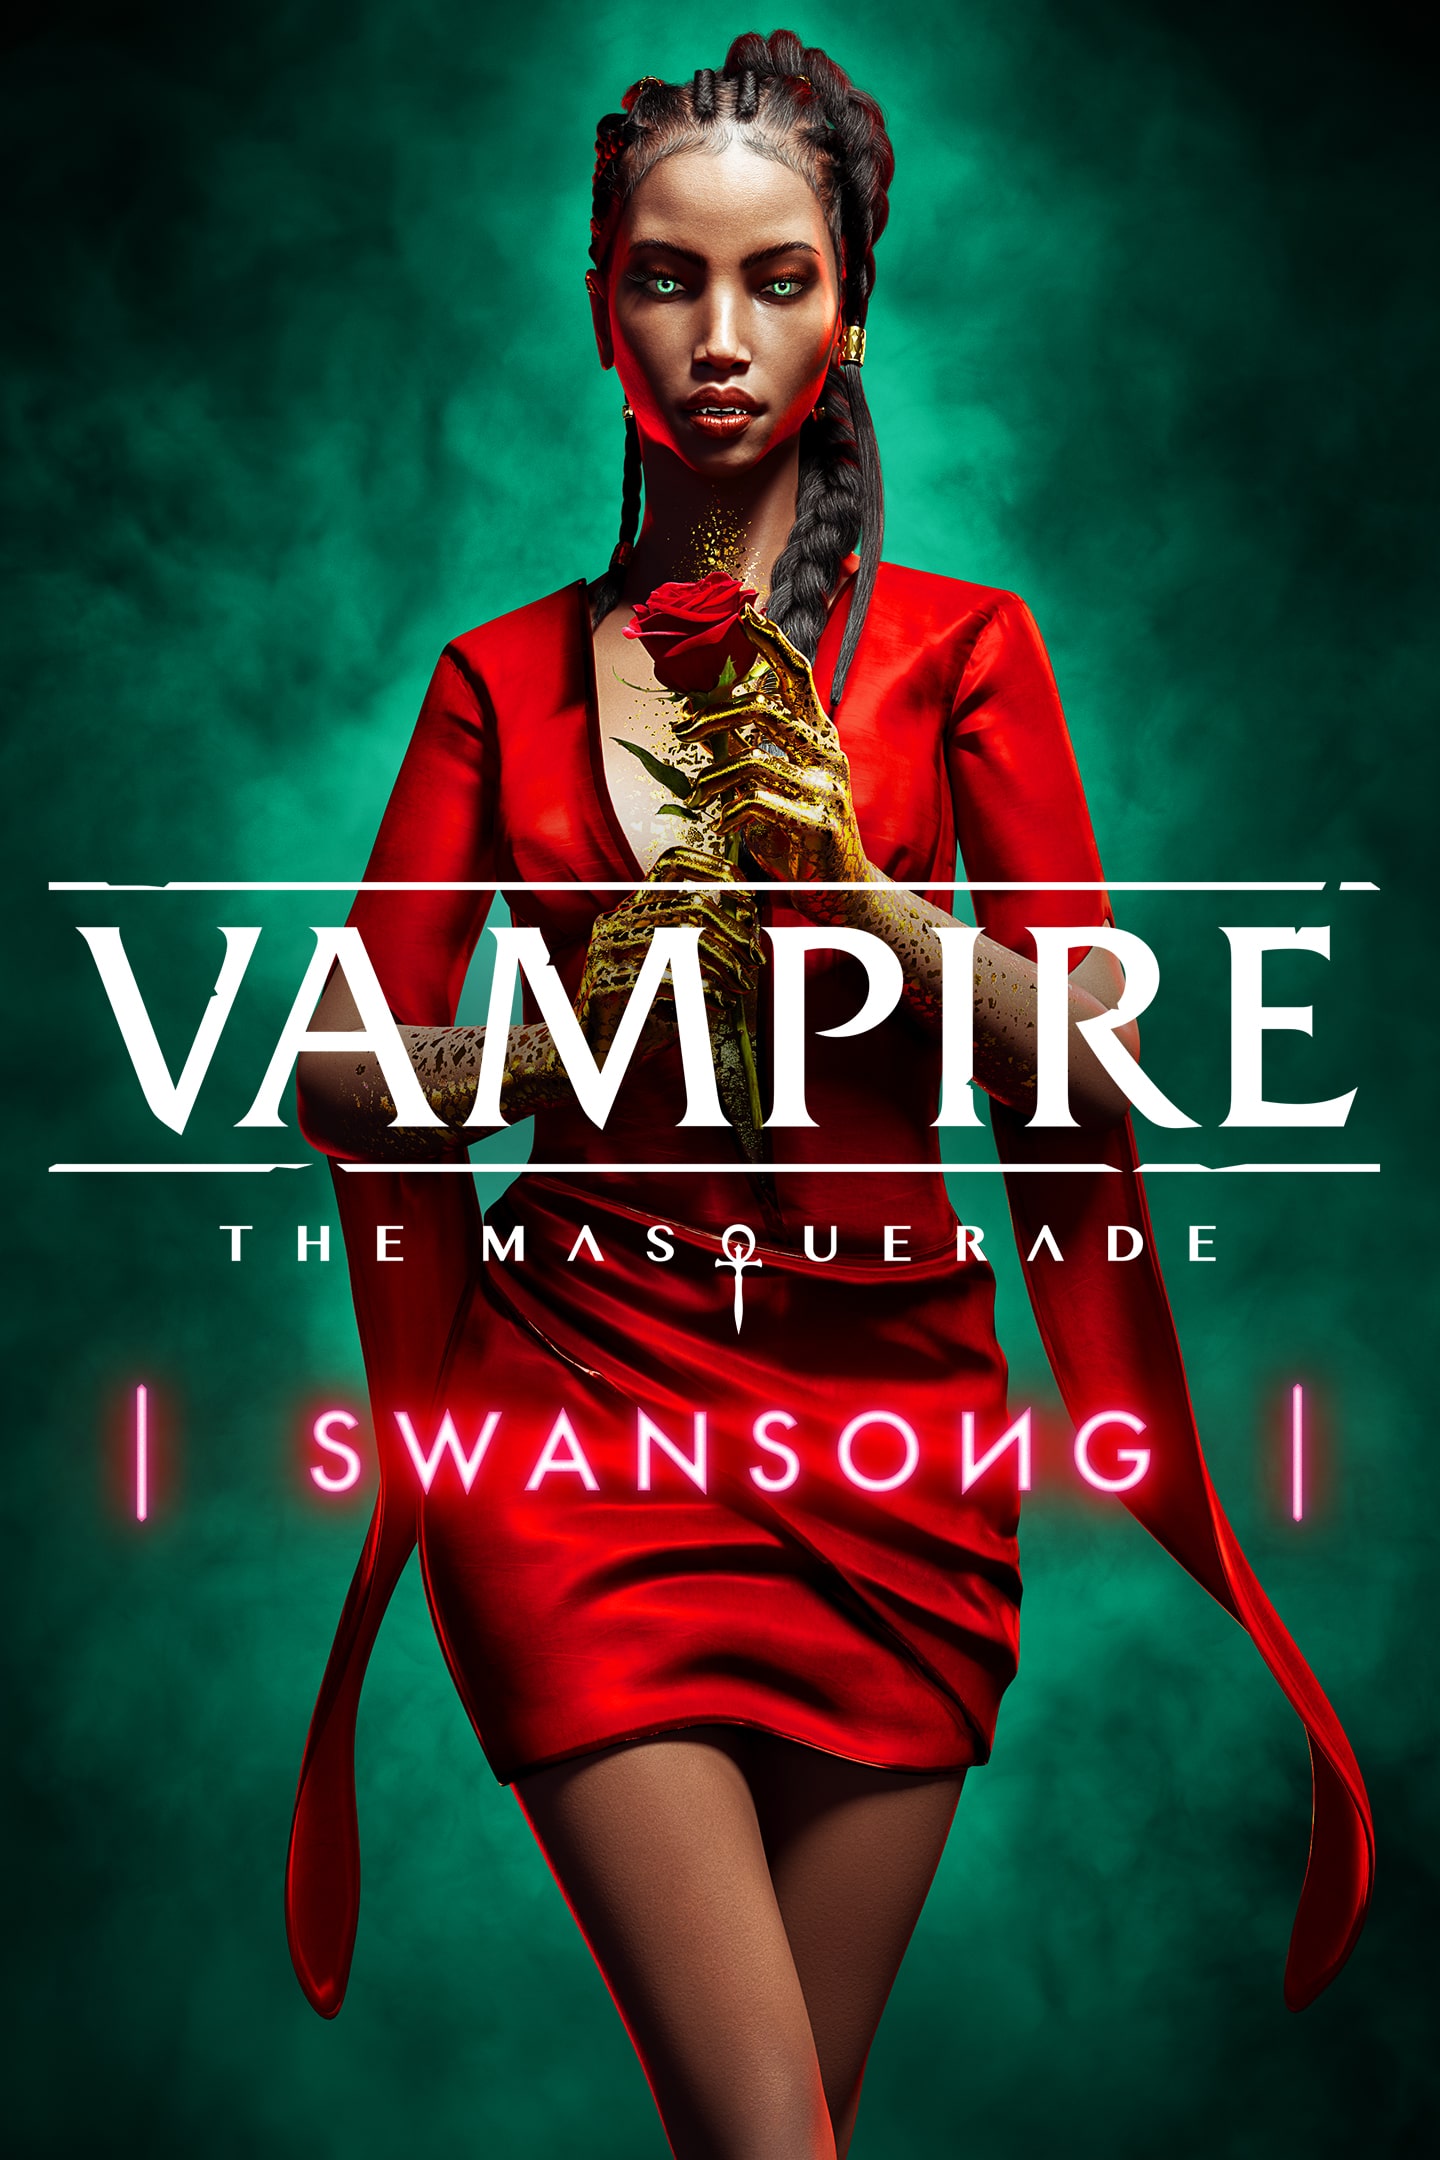 Vampire The Masquerade Swansong - PS4 - Brand New, Factory Sealed